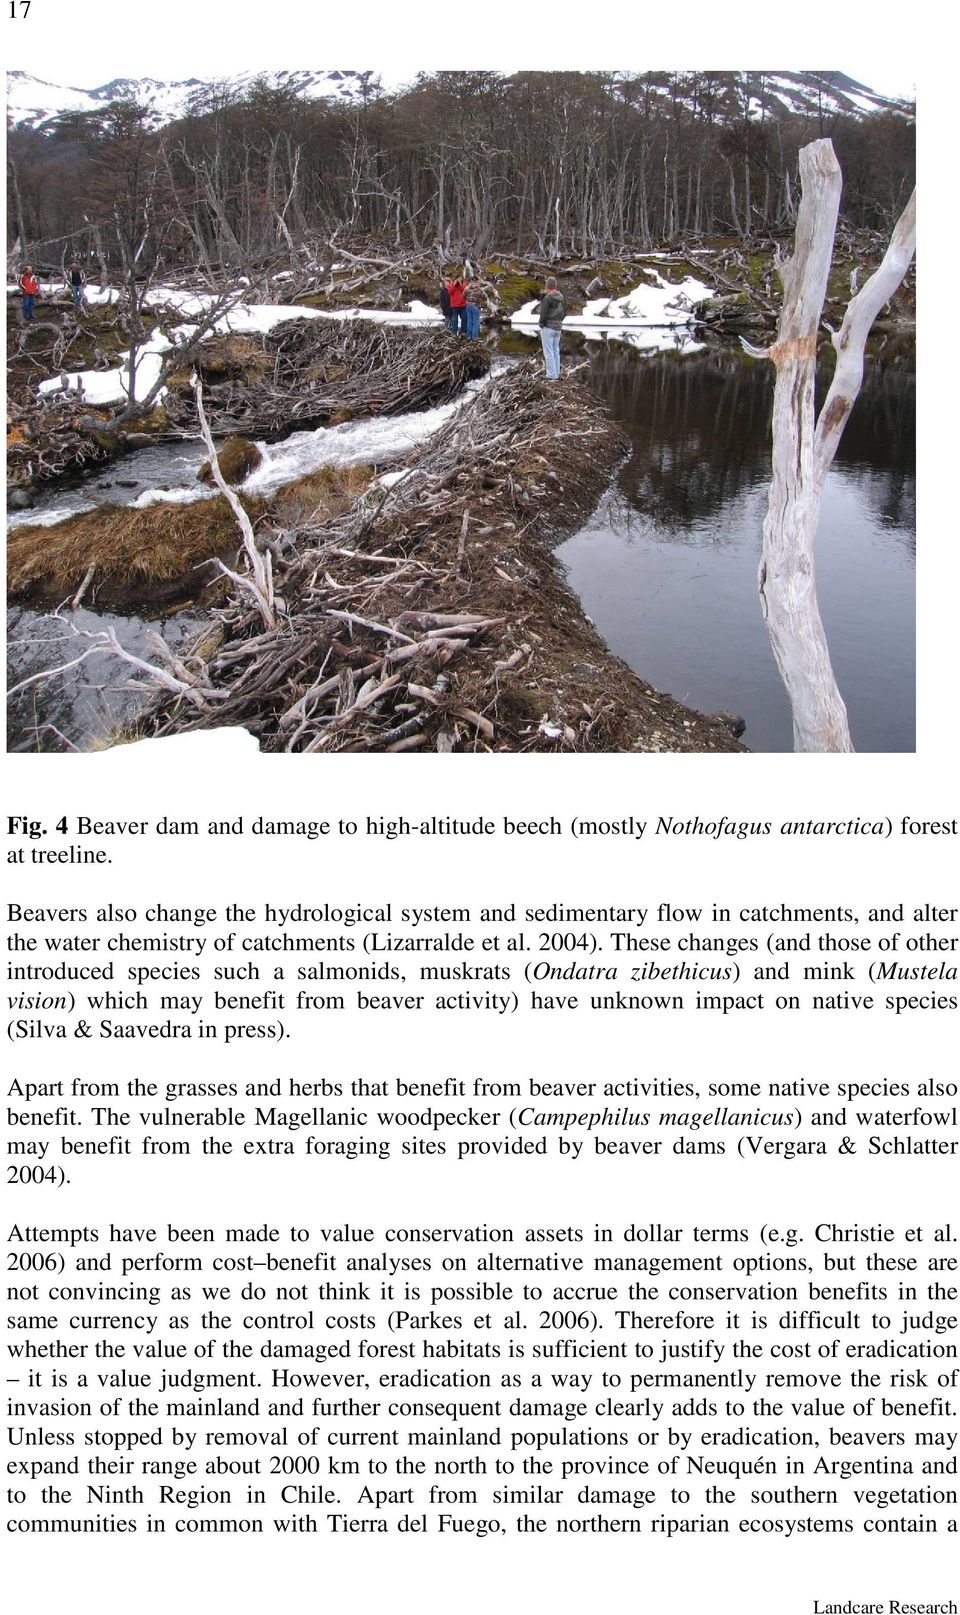 These changes (and those of other introduced species such a salmonids, muskrats (Ondatra zibethicus) and mink (Mustela vision) which may benefit from beaver activity) have unknown impact on native